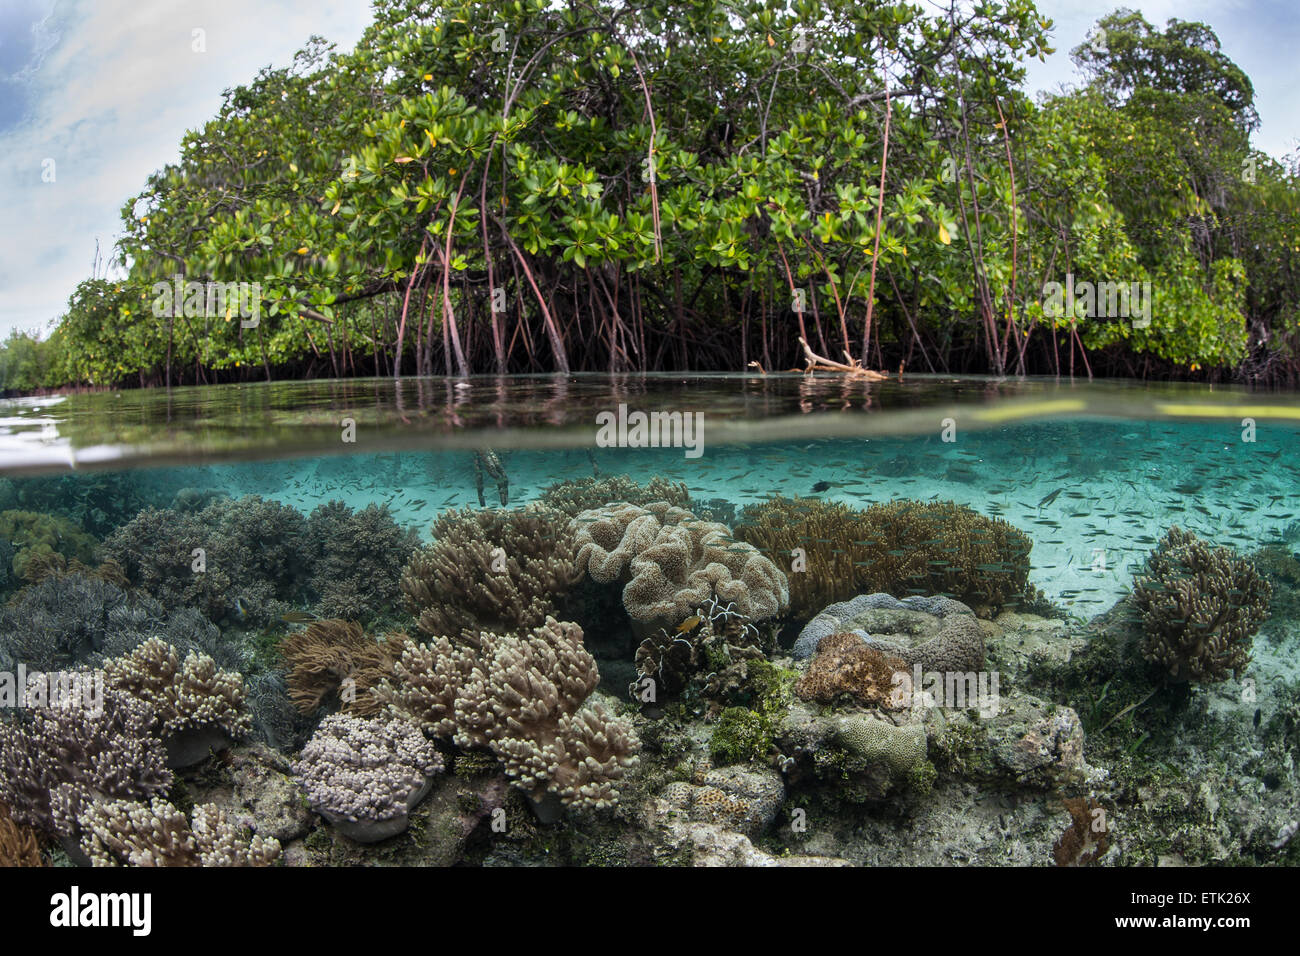 A variety of corals grow along the edge of a beautiful mangrove forest in Raja Ampat, Indonesia. Stock Photo